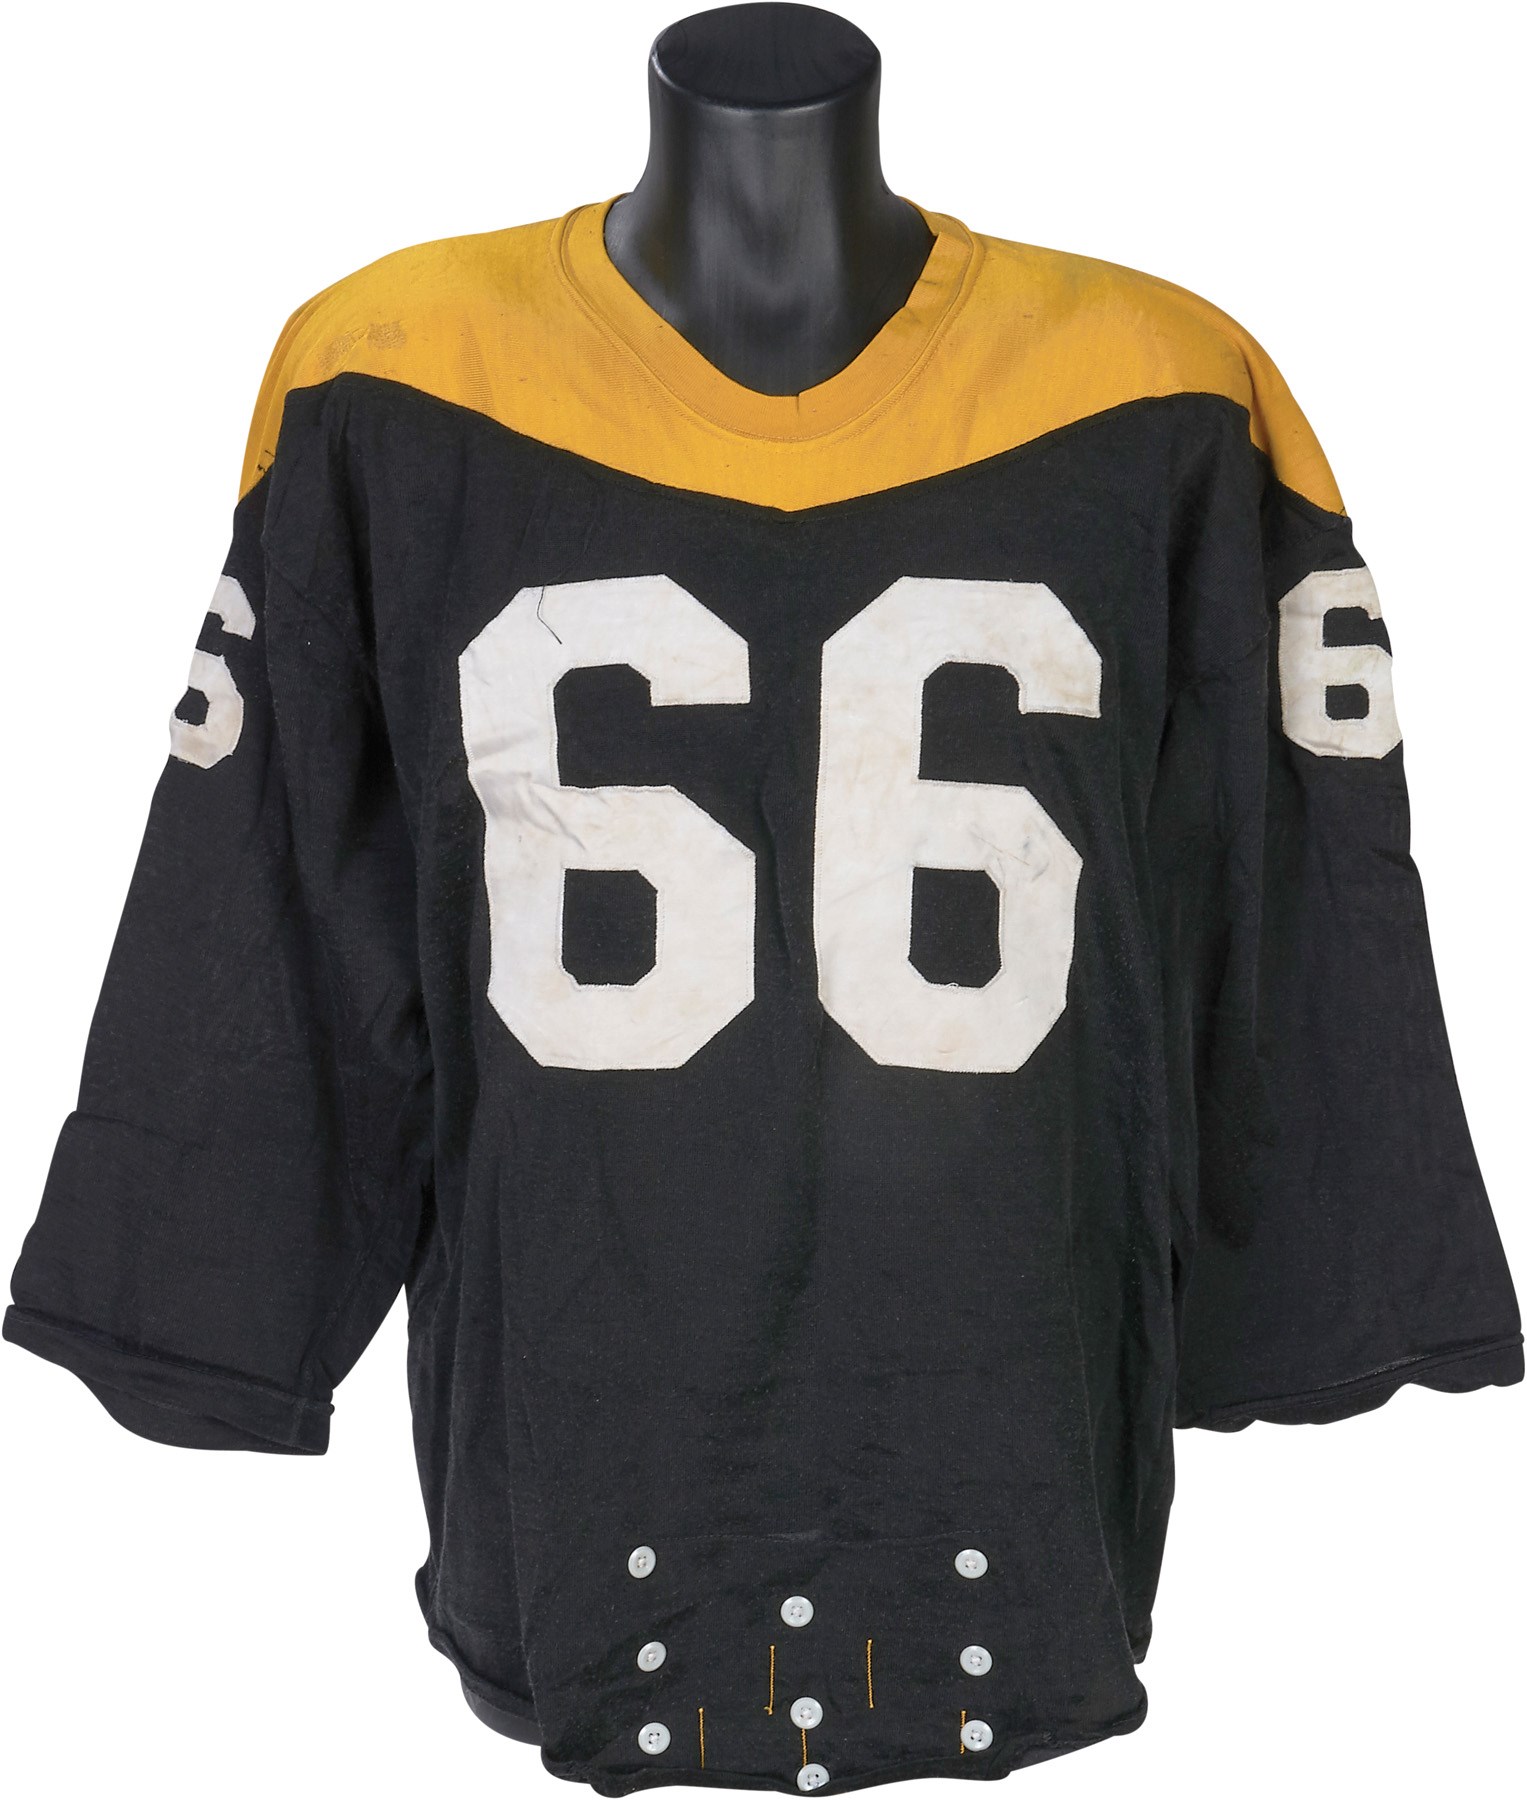 The Pittsburgh Steelers Game Worn Jersey Archive - 1967 Bruce Van Dyke Pittsburgh Steelers Game Worn Jersey